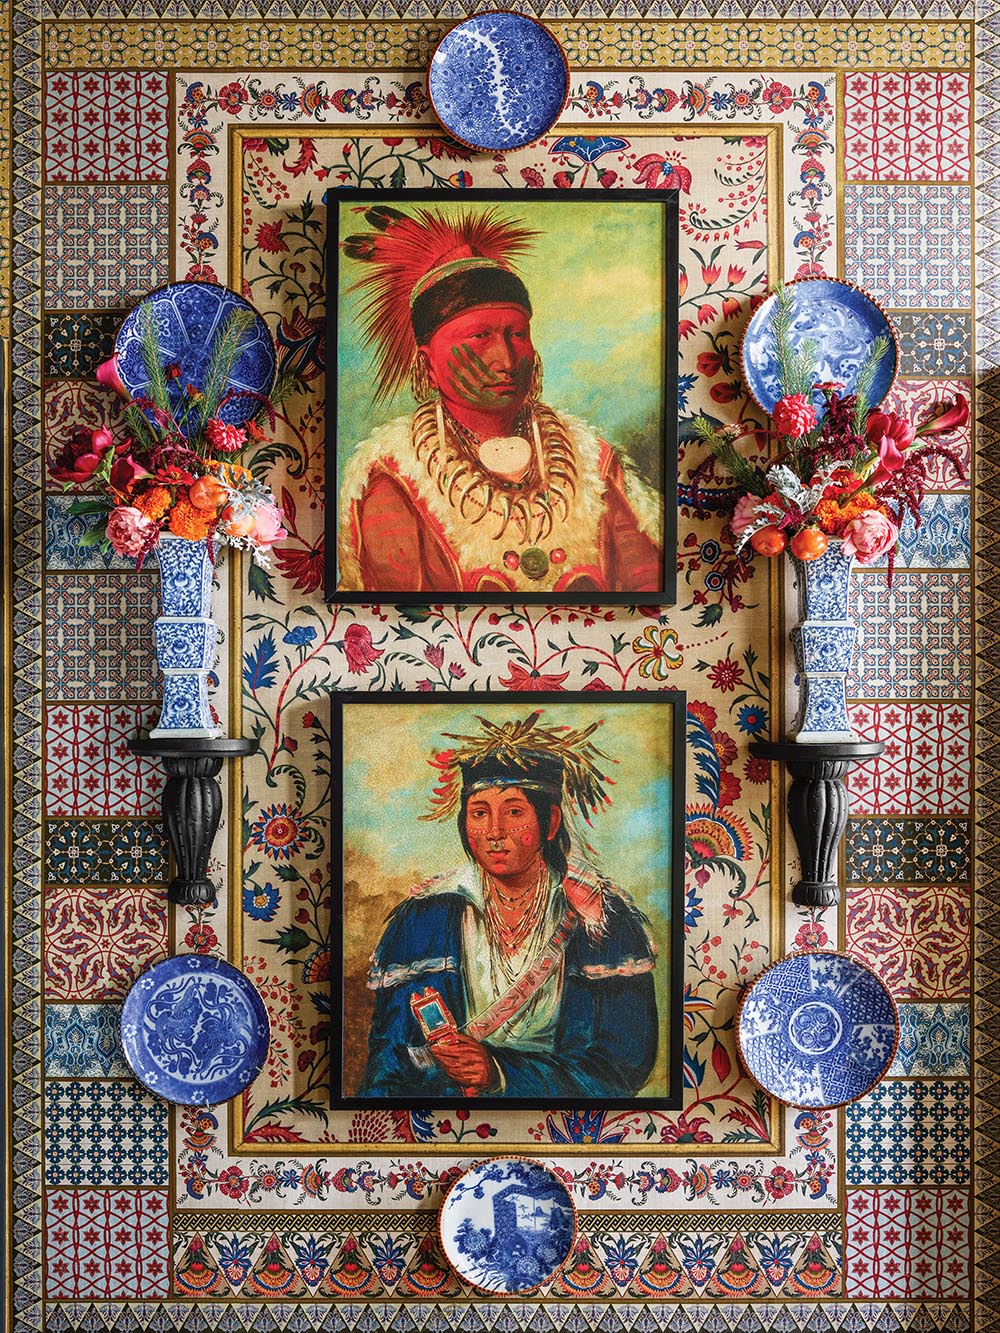 Wall of the entrance hall with Paul Montgomery wallpaper, paintings of native Americans, blue and white plates and vases of flowers.